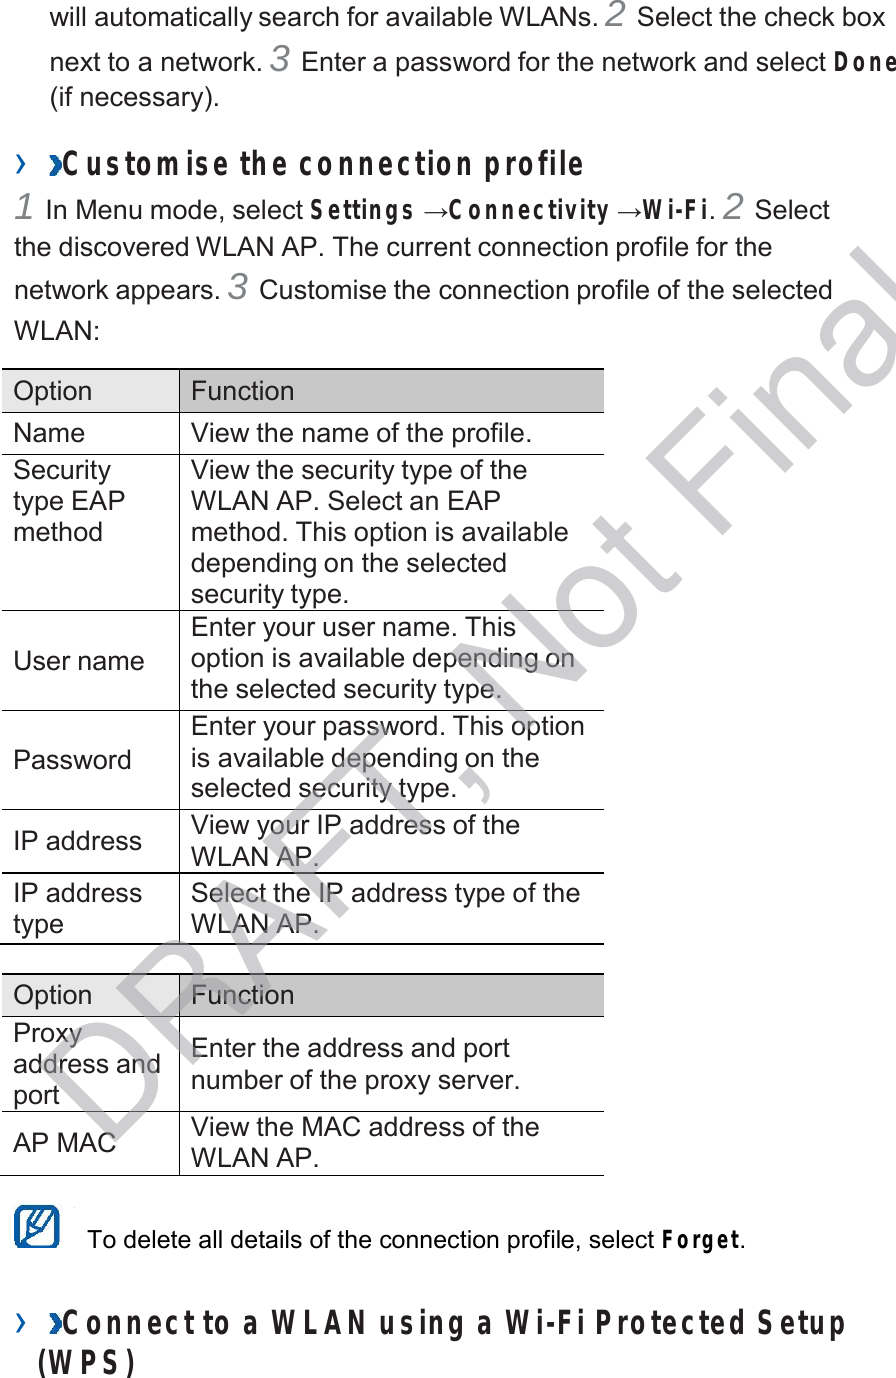  will automatically search for available WLANs. 2 Select the check box next to a network. 3 Enter a password for the network and select Done (if necessary).  ›  Customise the connection profile 1 In Menu mode, select Settings →Connectivity →Wi-Fi. 2 Select the discovered WLAN AP. The current connection profile for the network appears. 3 Customise the connection profile of the selected WLAN:  Option Function Name View the name of the profile. Security type EAP method View the security type of the WLAN AP. Select an EAP method. This option is available depending on the selected security type.   User name Enter your user name. This option is available depending on the selected security type.   Password Enter your password. This option is available depending on the selected security type.  IP address View your IP address of the WLAN AP. IP address type Select the IP address type of the WLAN AP.  Option Function Proxy address and port  Enter the address and port number of the proxy server.  AP MAC View the MAC address of the WLAN AP.   To delete all details of the connection profile, select Forget.   ›  Connect to a WLAN using a Wi-Fi Protected Setup (W PS) DRAFT, Not Final